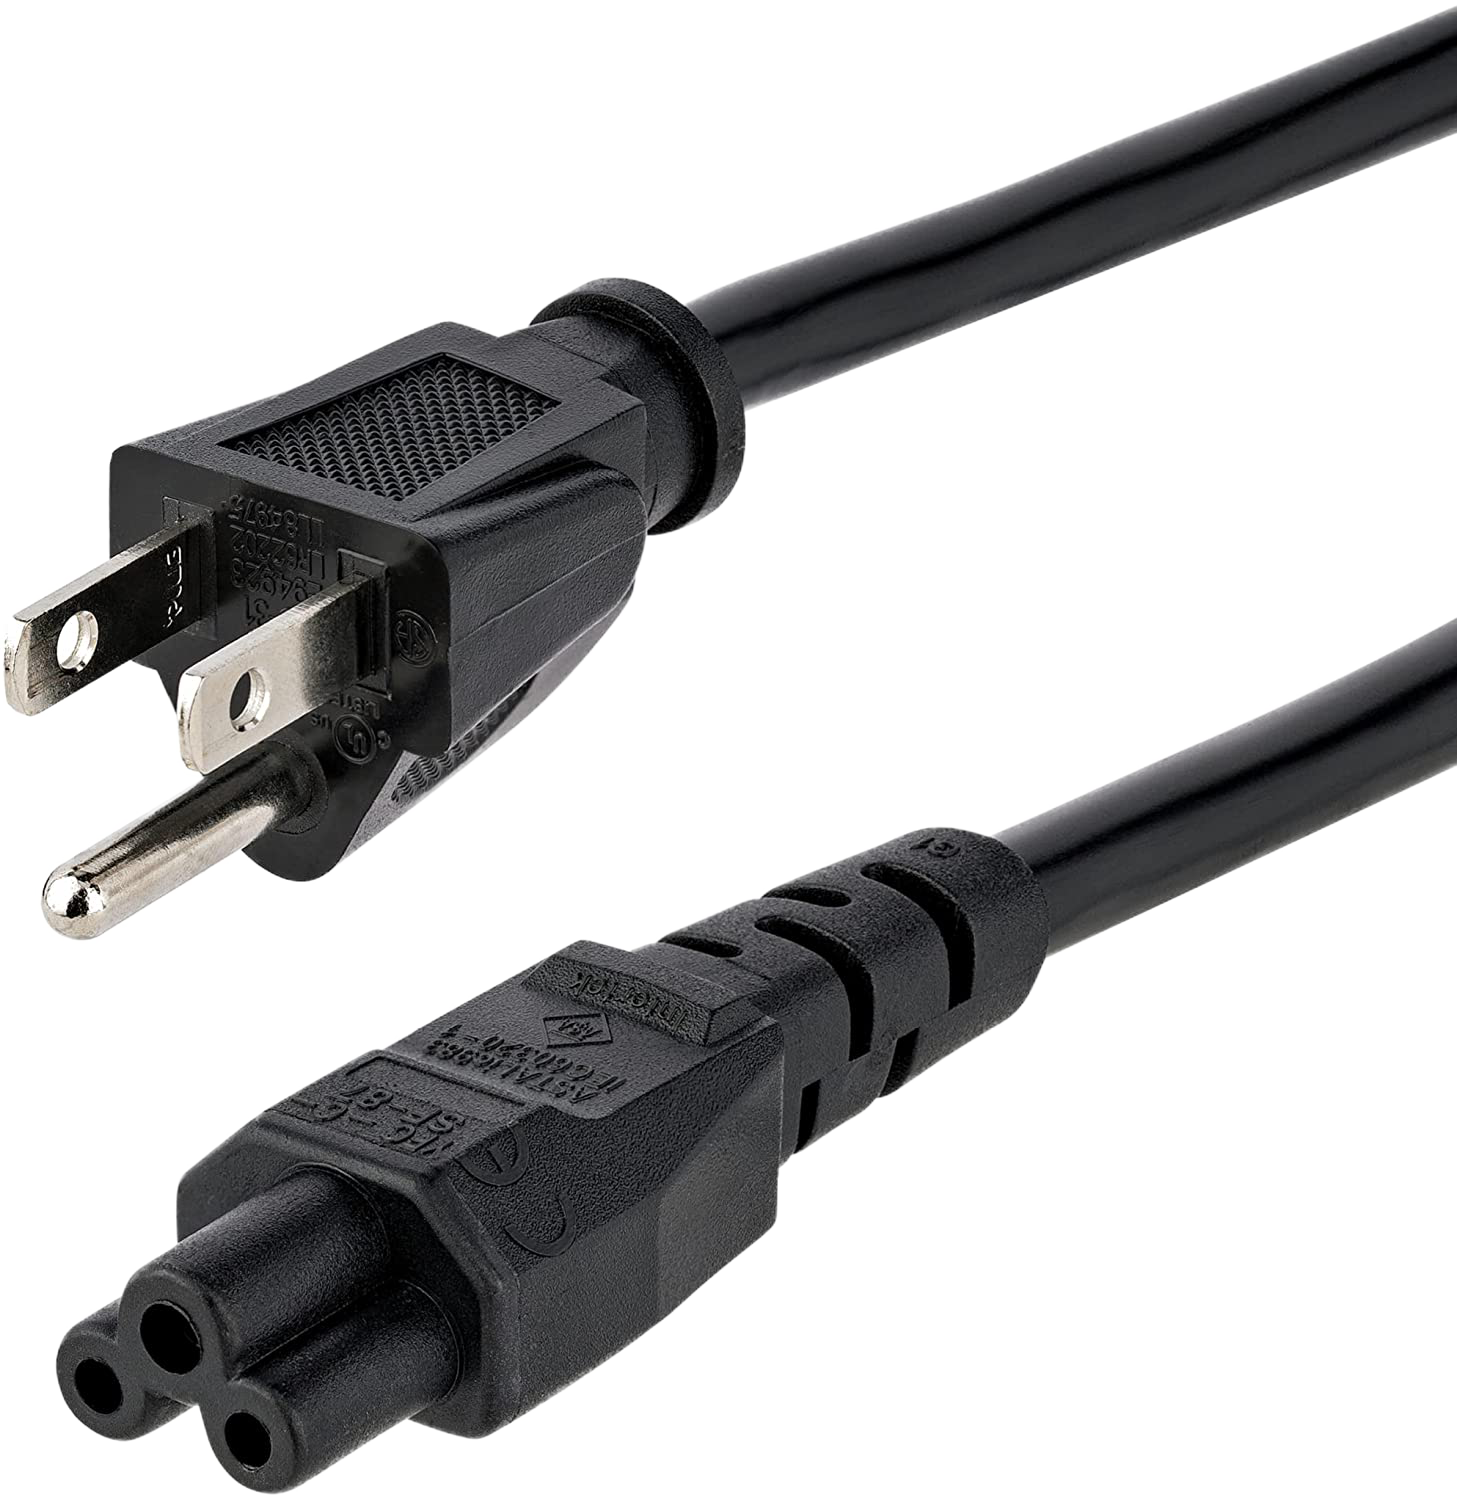 Laptop Power Cord, NEMA 1-15P to C5 (Mickey Mouse), 10A 125V, 18AWG Laptop Replacement Cord